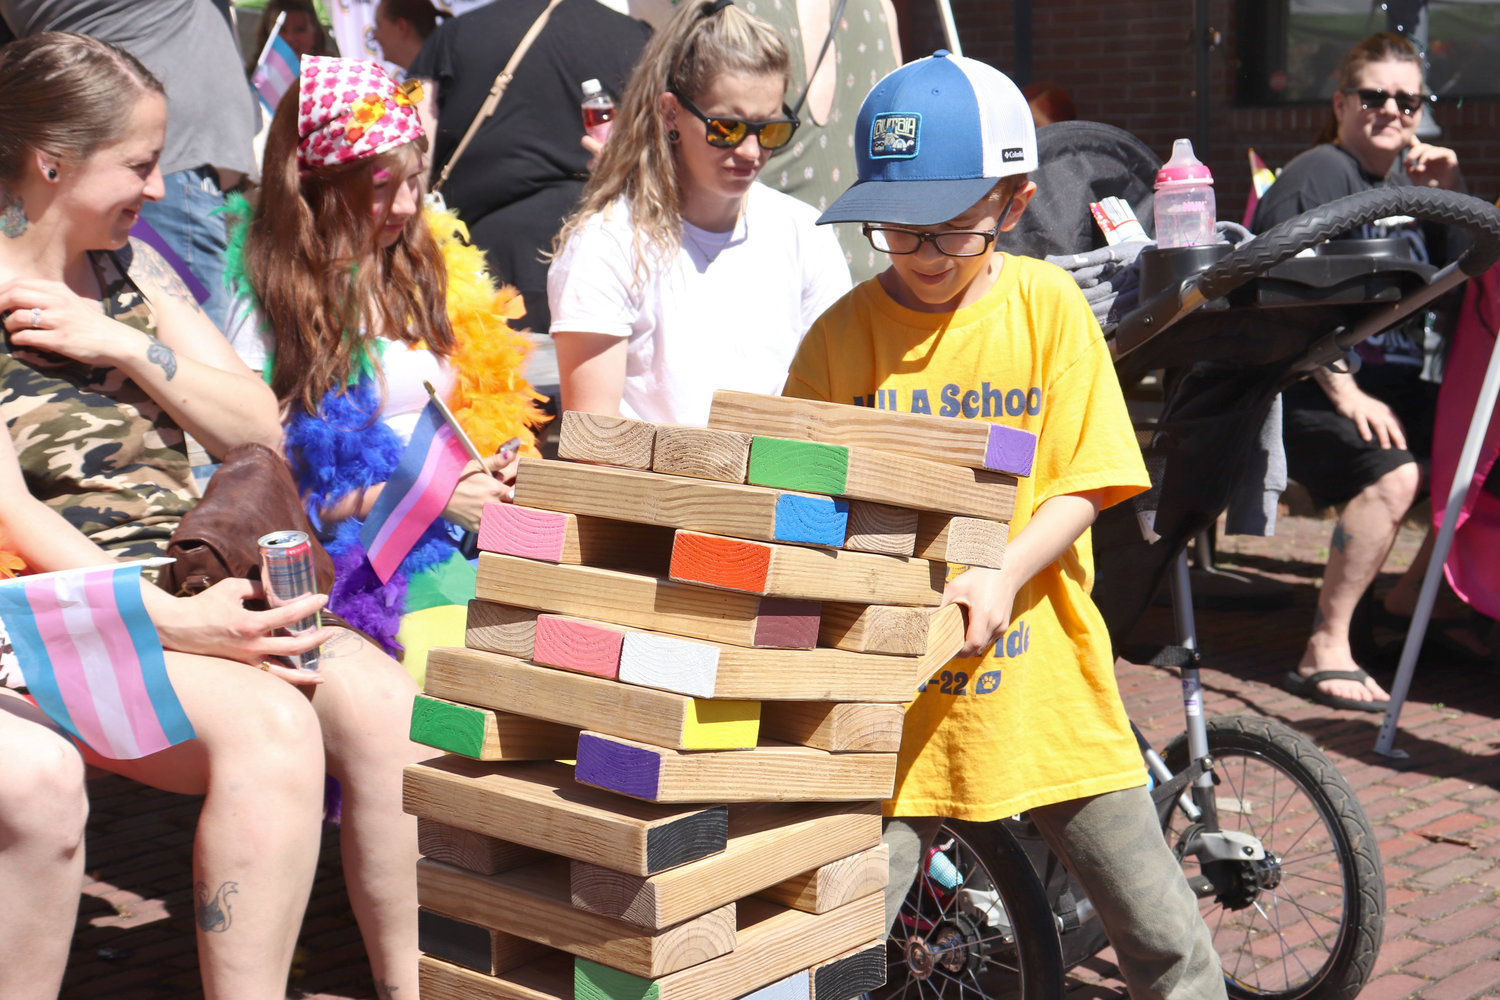 Stanford Castonguay, 7, extracts a block from a crumbling Jenga tower during Lewis County Pride in Centralia on Saturday.